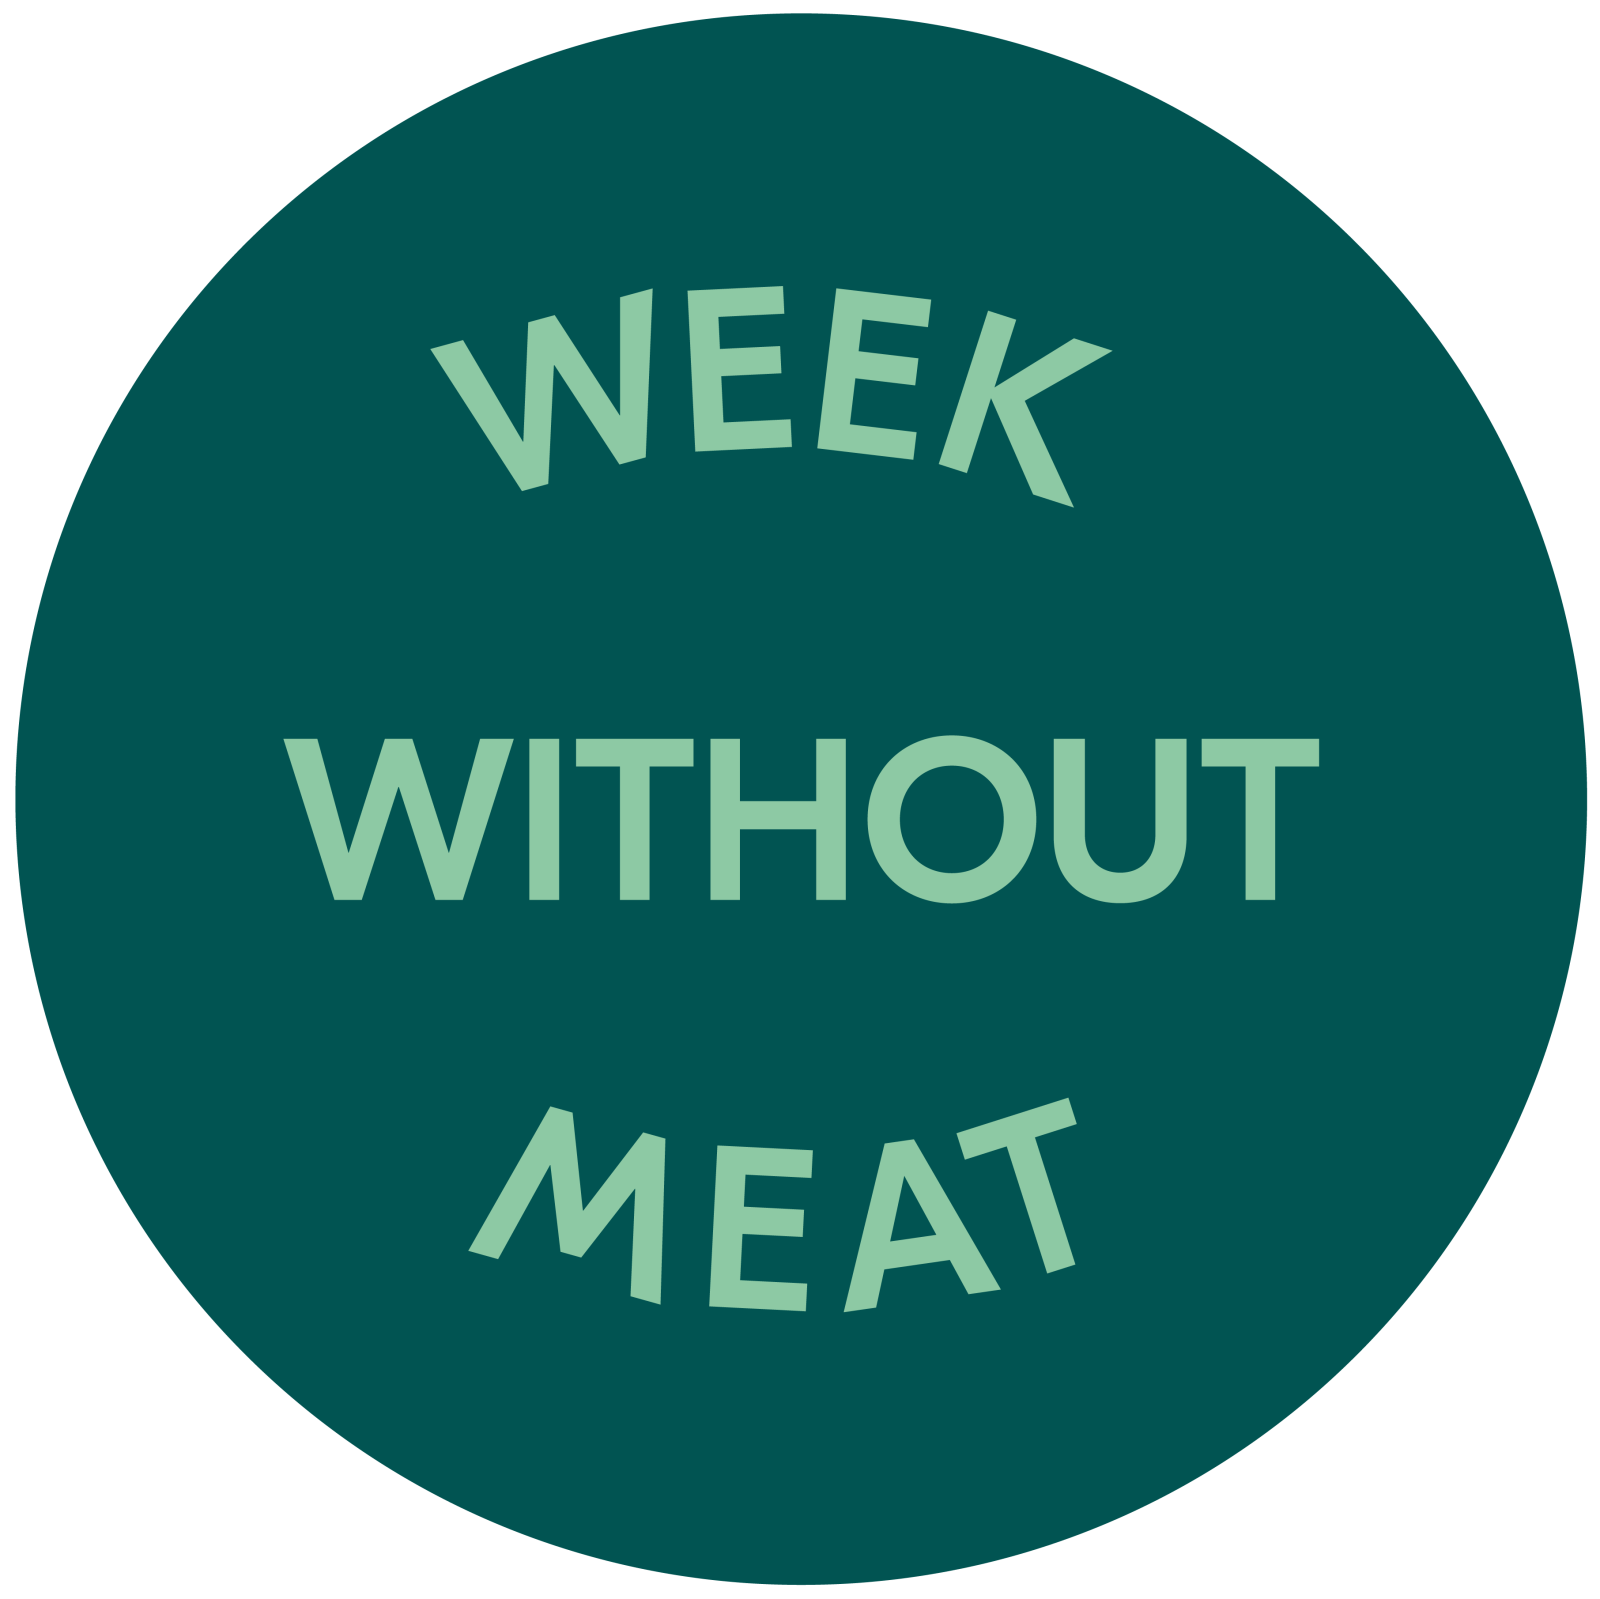 Week without meat